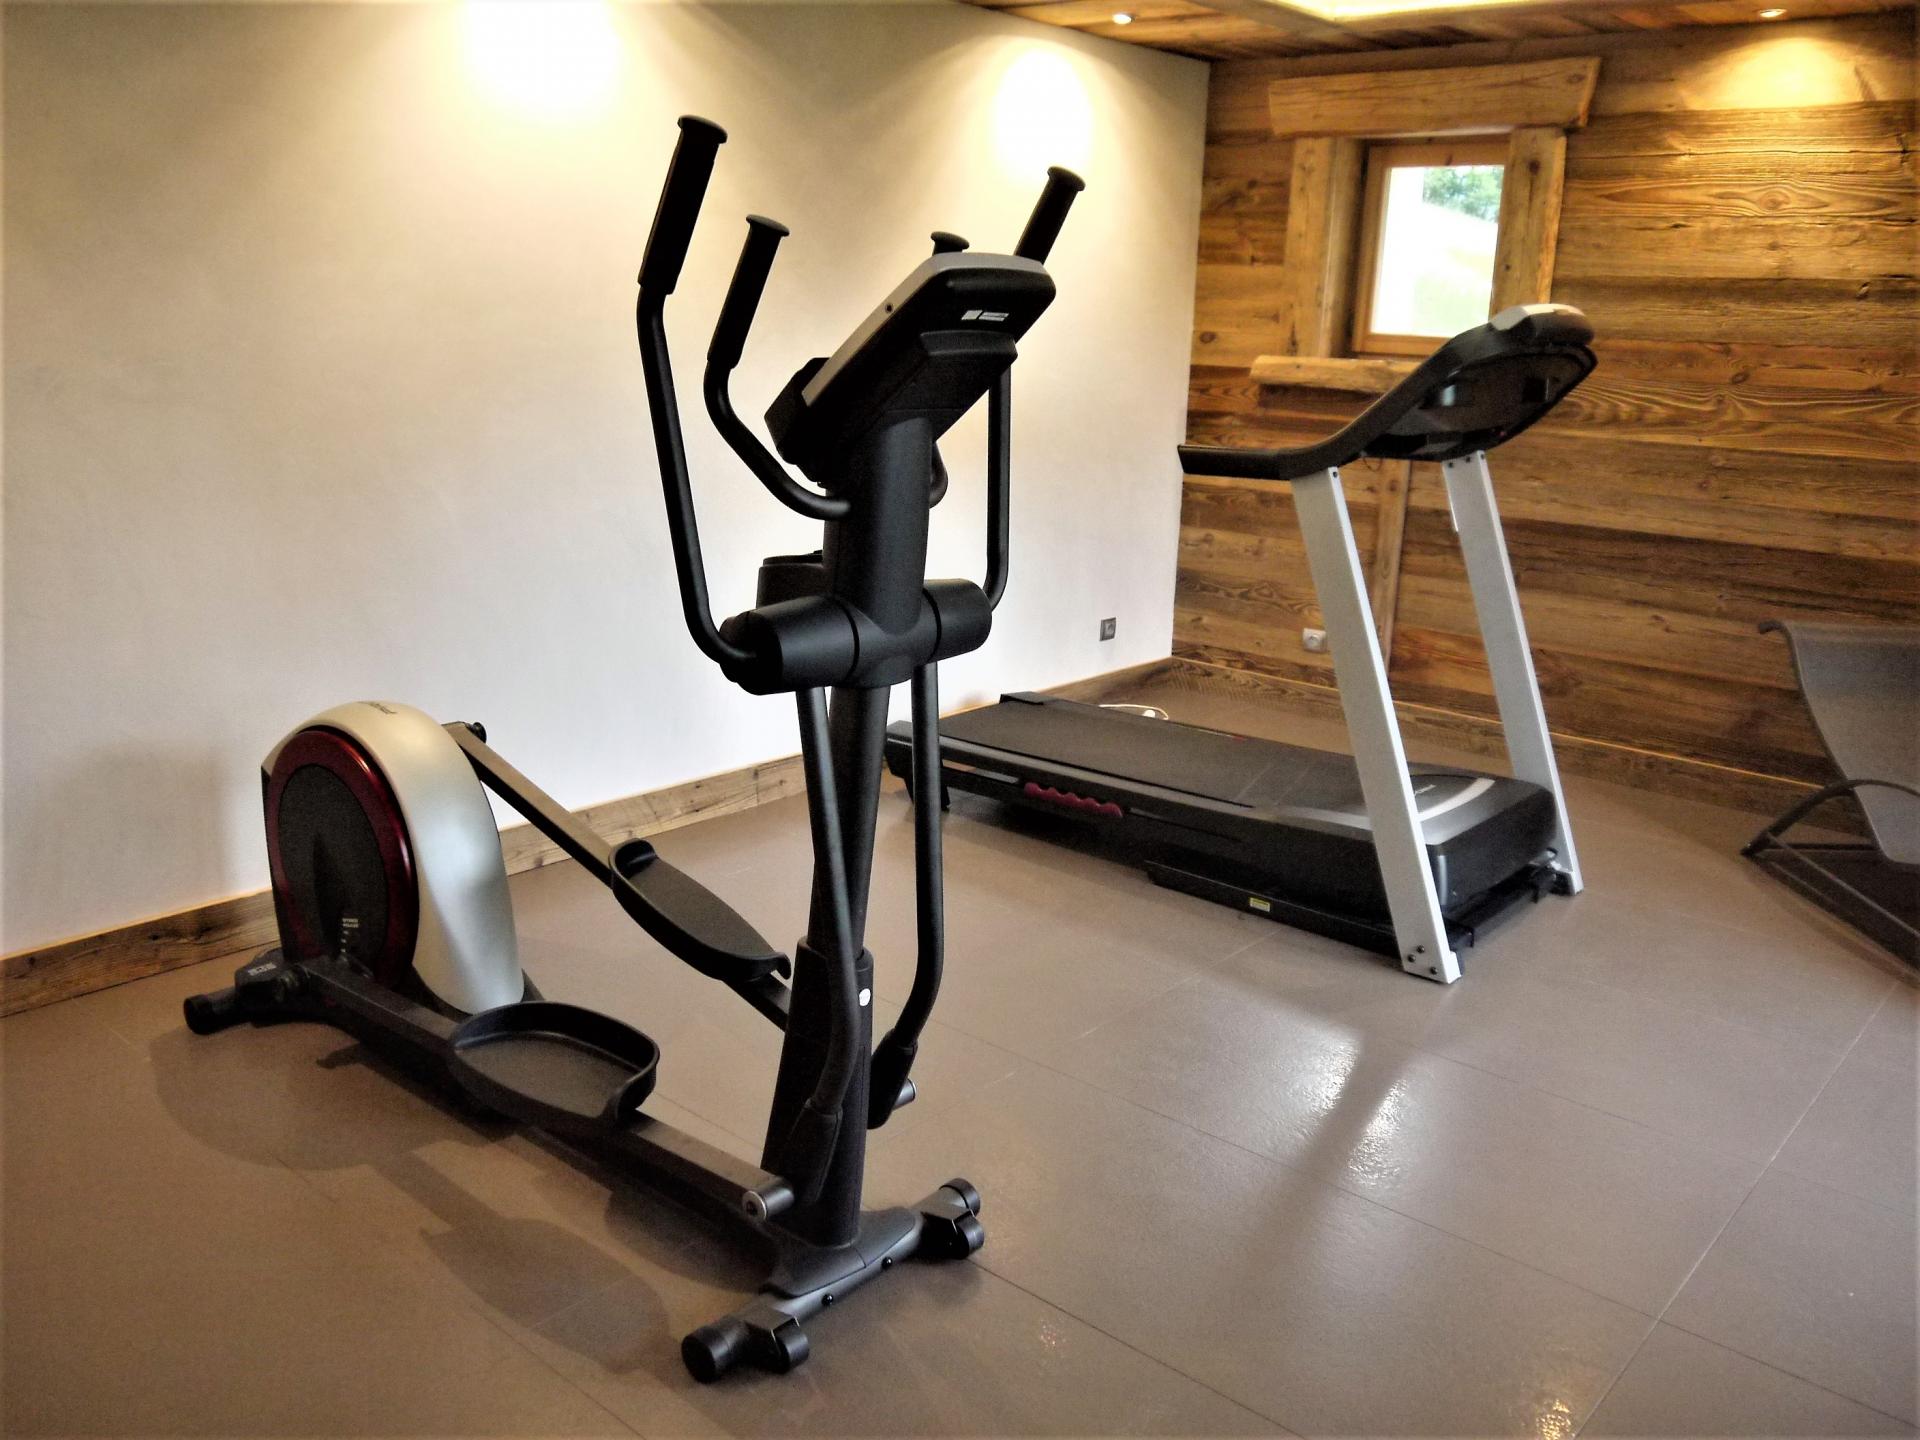 GYM EQUIPMENT SO THAT YOU CAN BE FIT TO SKI